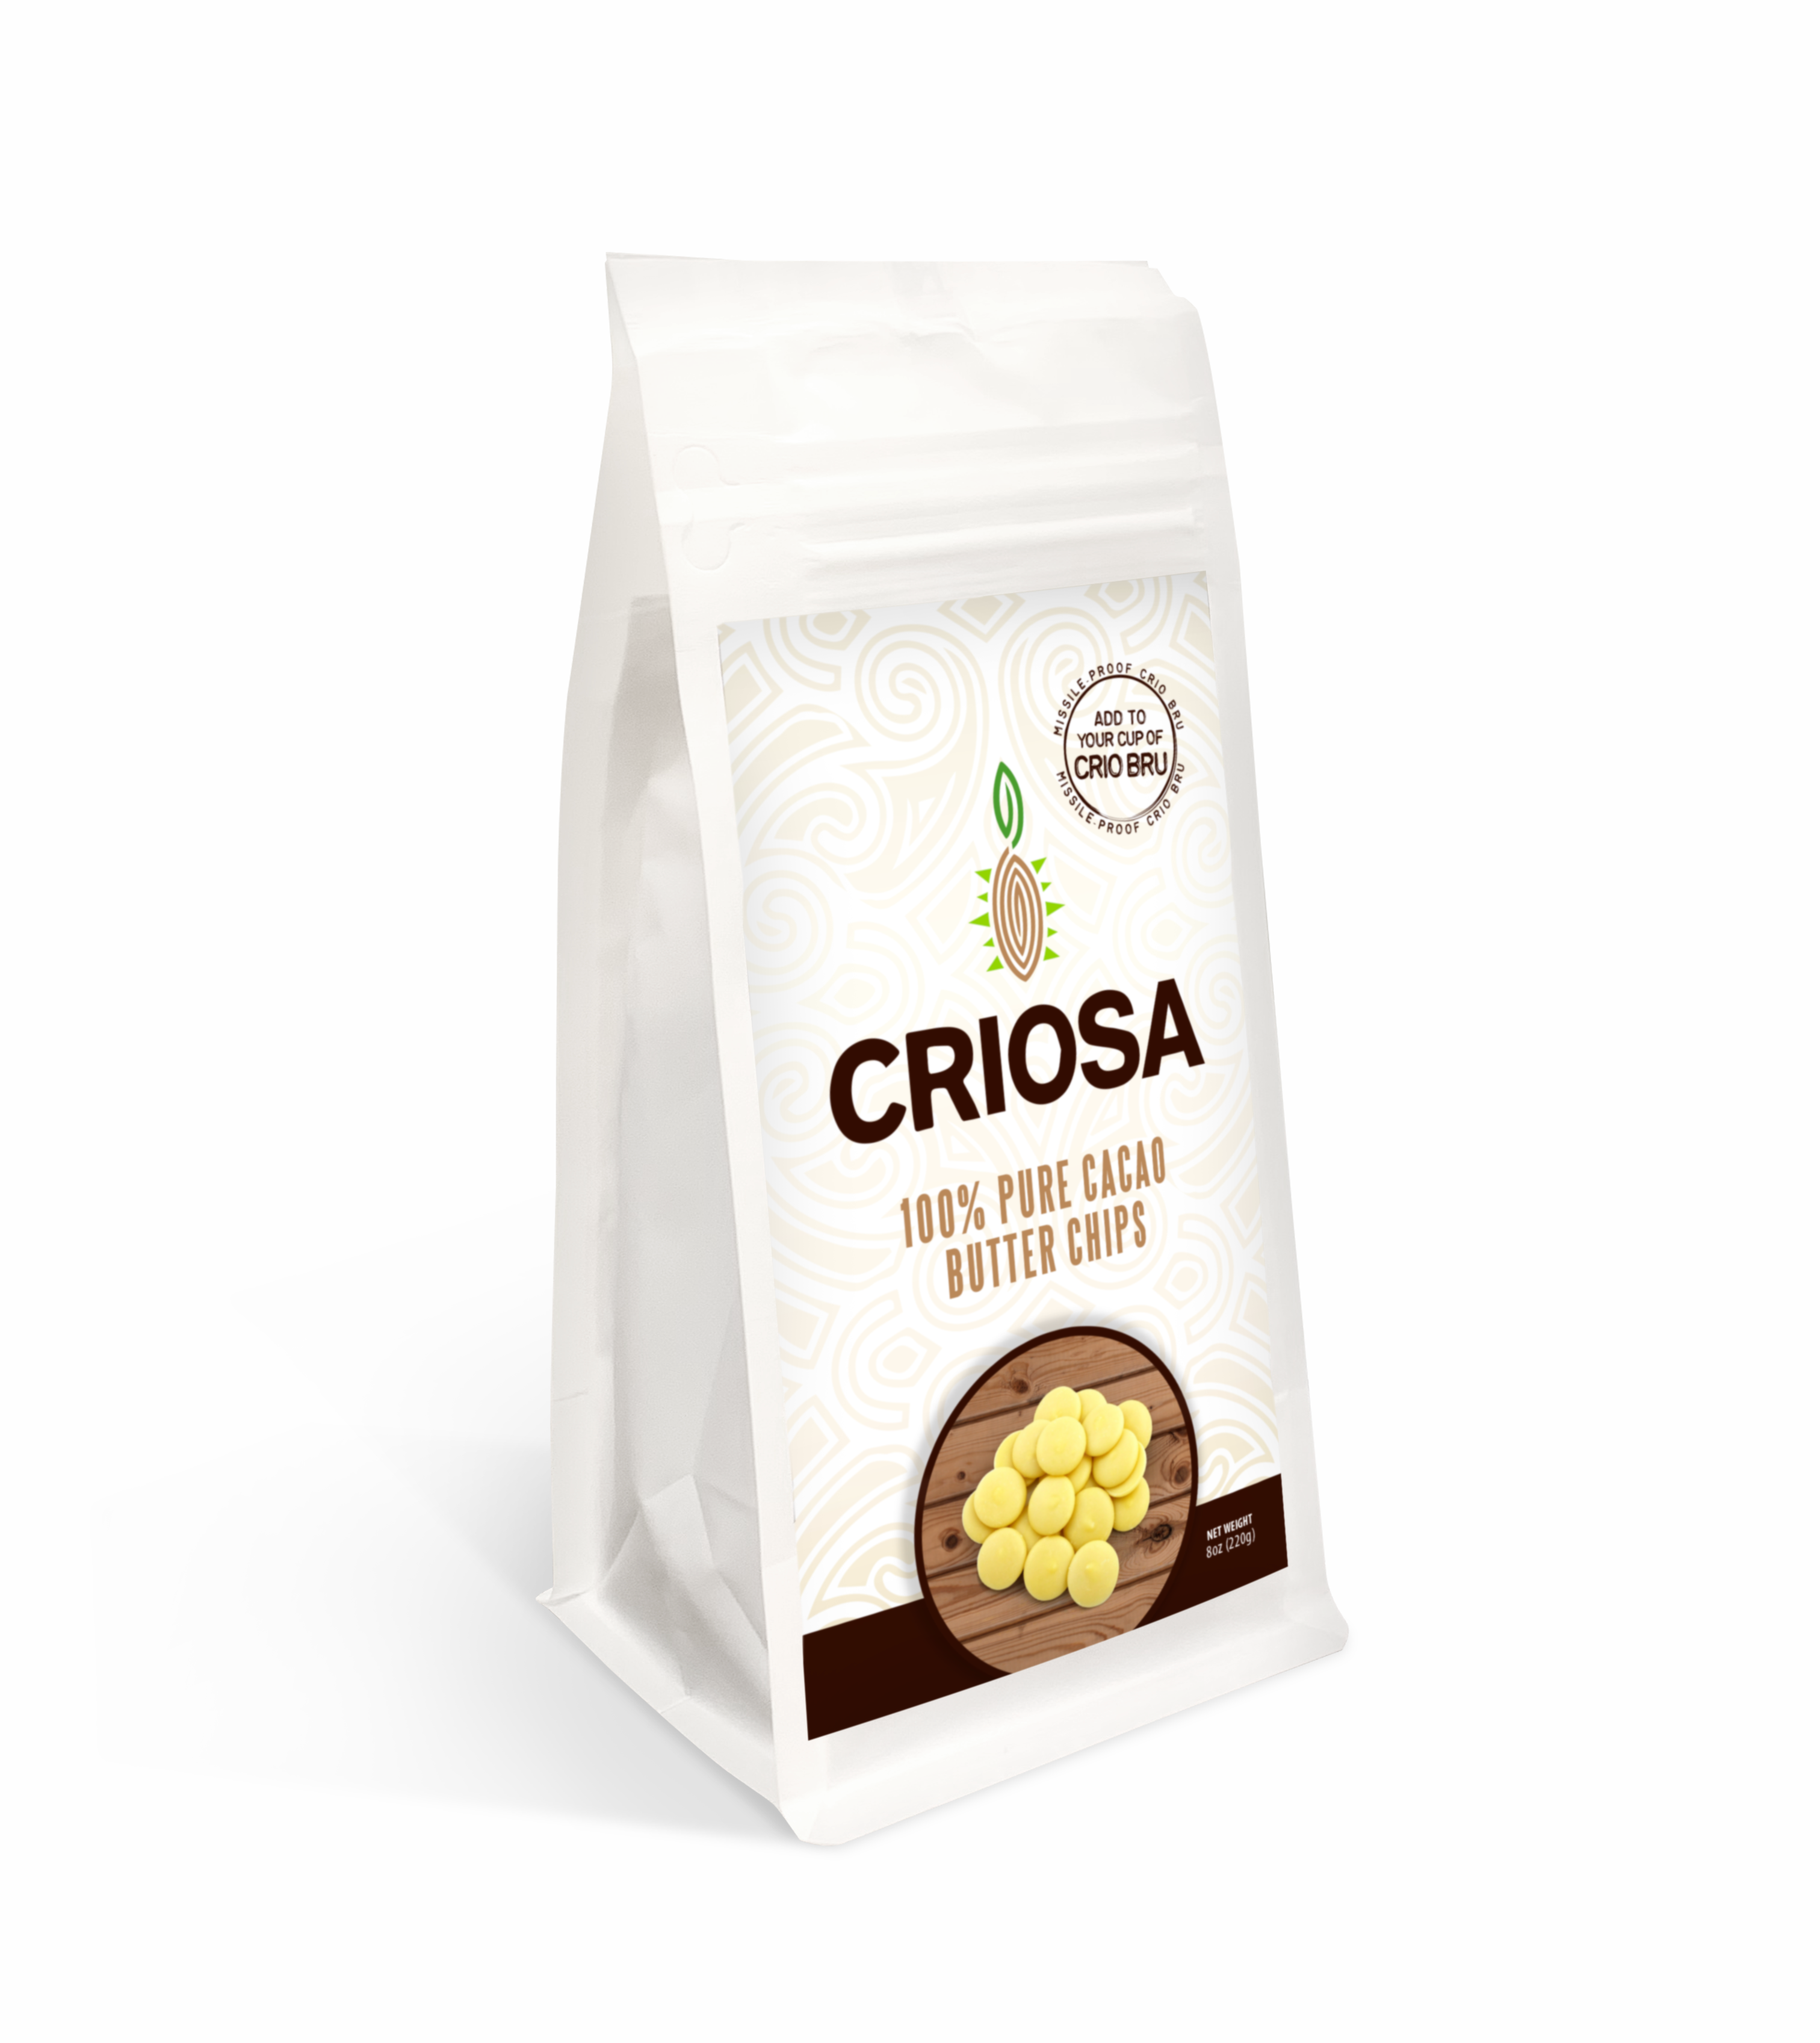 Image of CRIOSA 100% Pure Cacao Butter Chips (8oz)